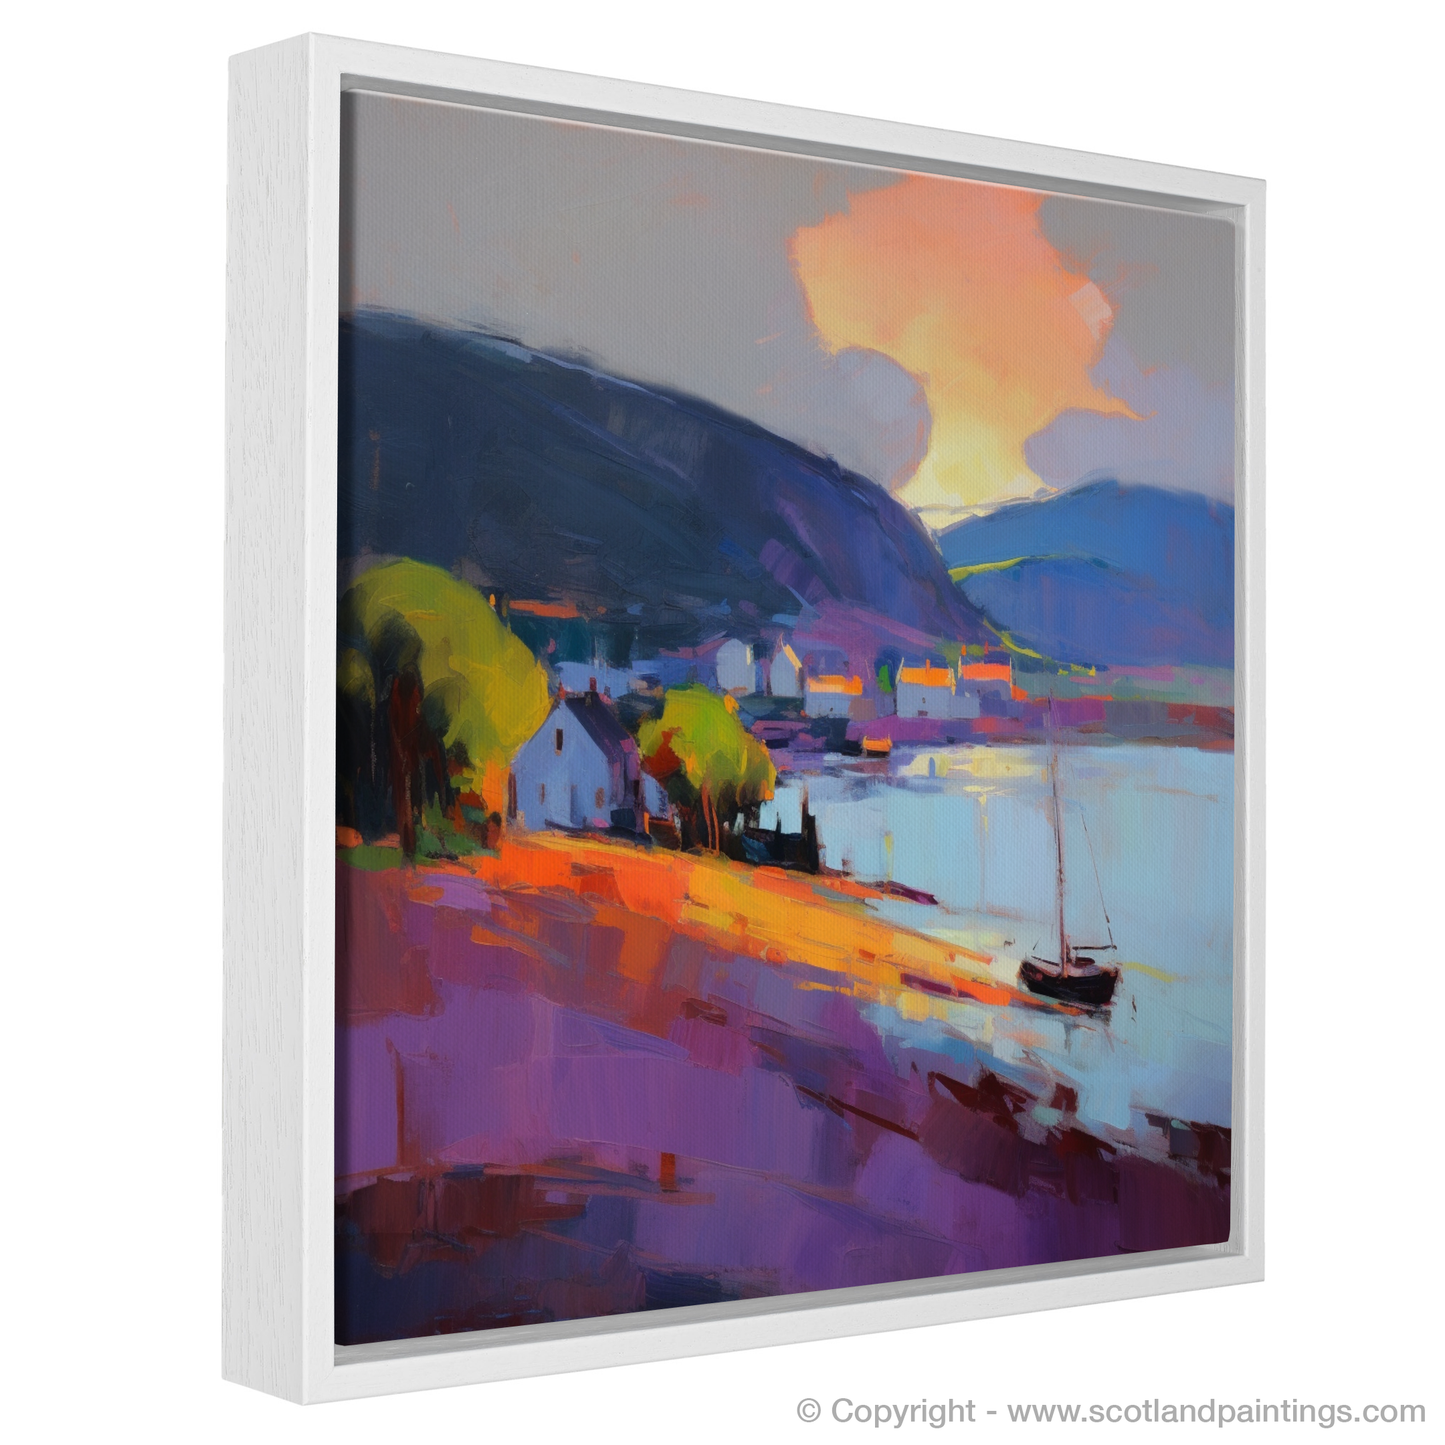 Cromarty Harbour at Dusk: An Expressionist Ode to Scottish Splendour